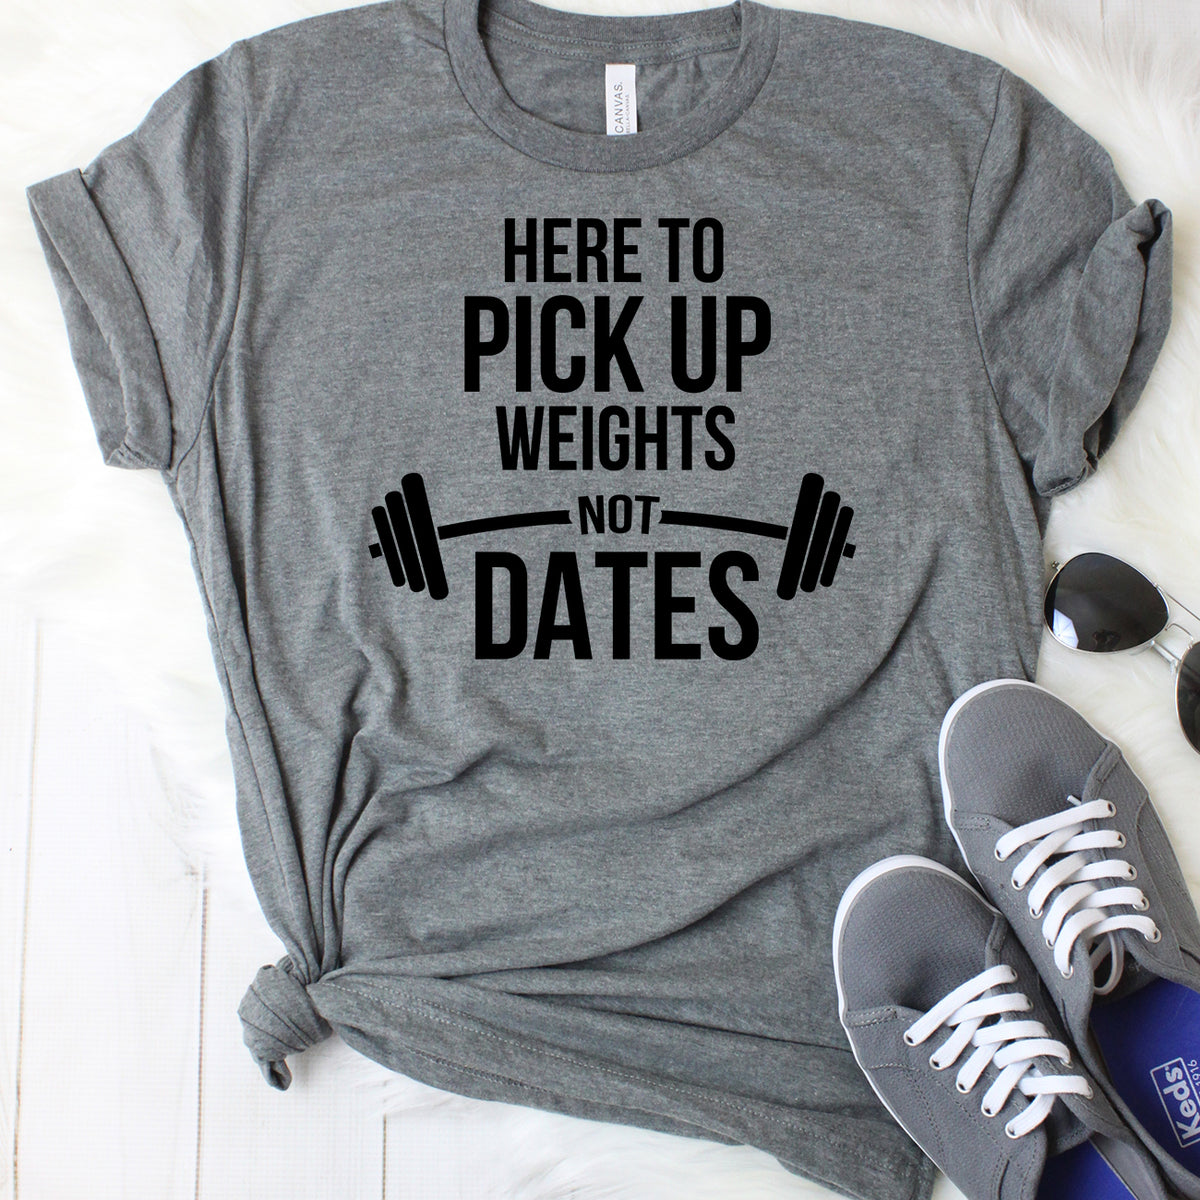 Here to Pick Up Weights Not Dates T-Shirt